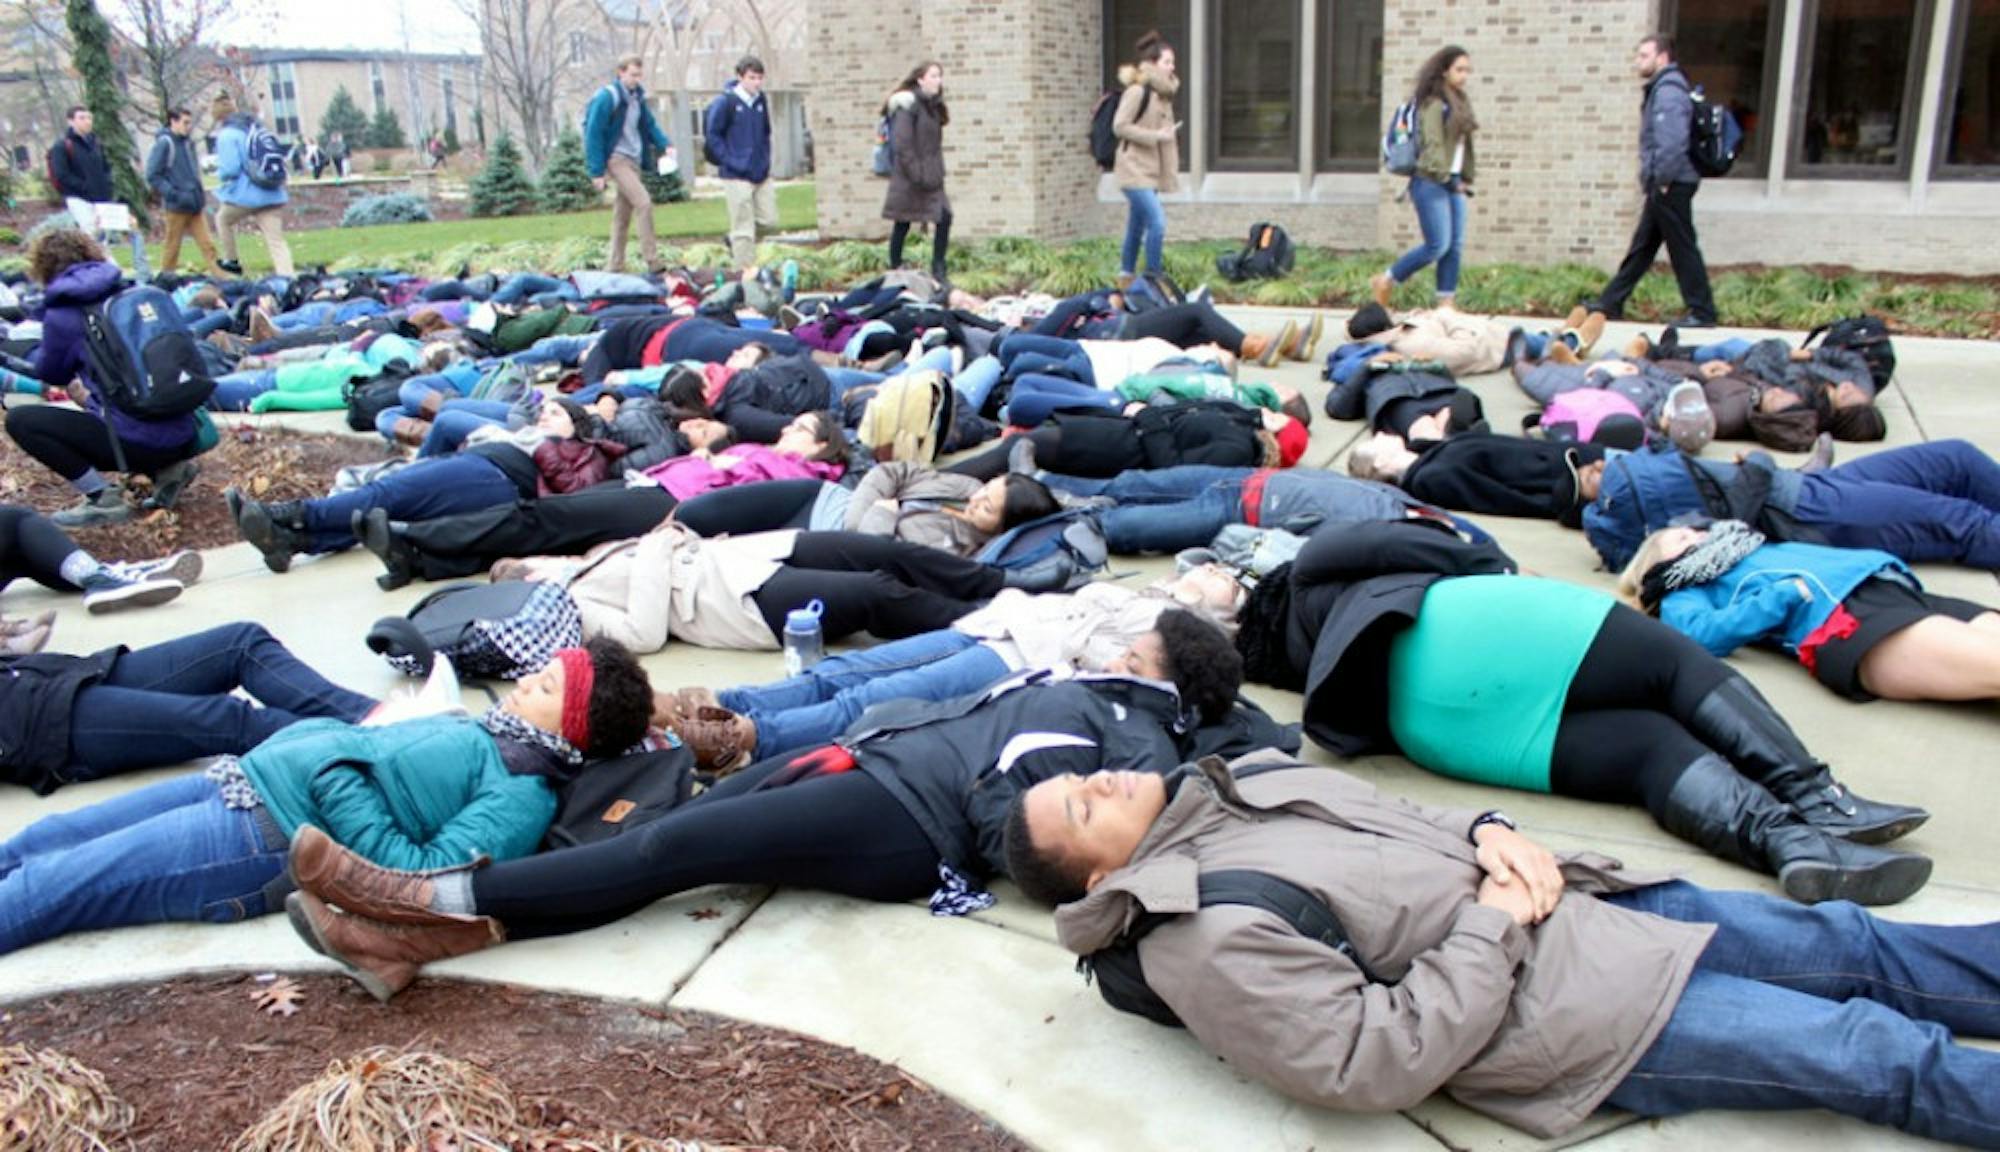 Students and members of the Notre Dame community cover the space in between O’Shaughnessy and DeBartolo Halls in a “die-in” Tuesday, part of a demonstration against police brutality and racial injustice.